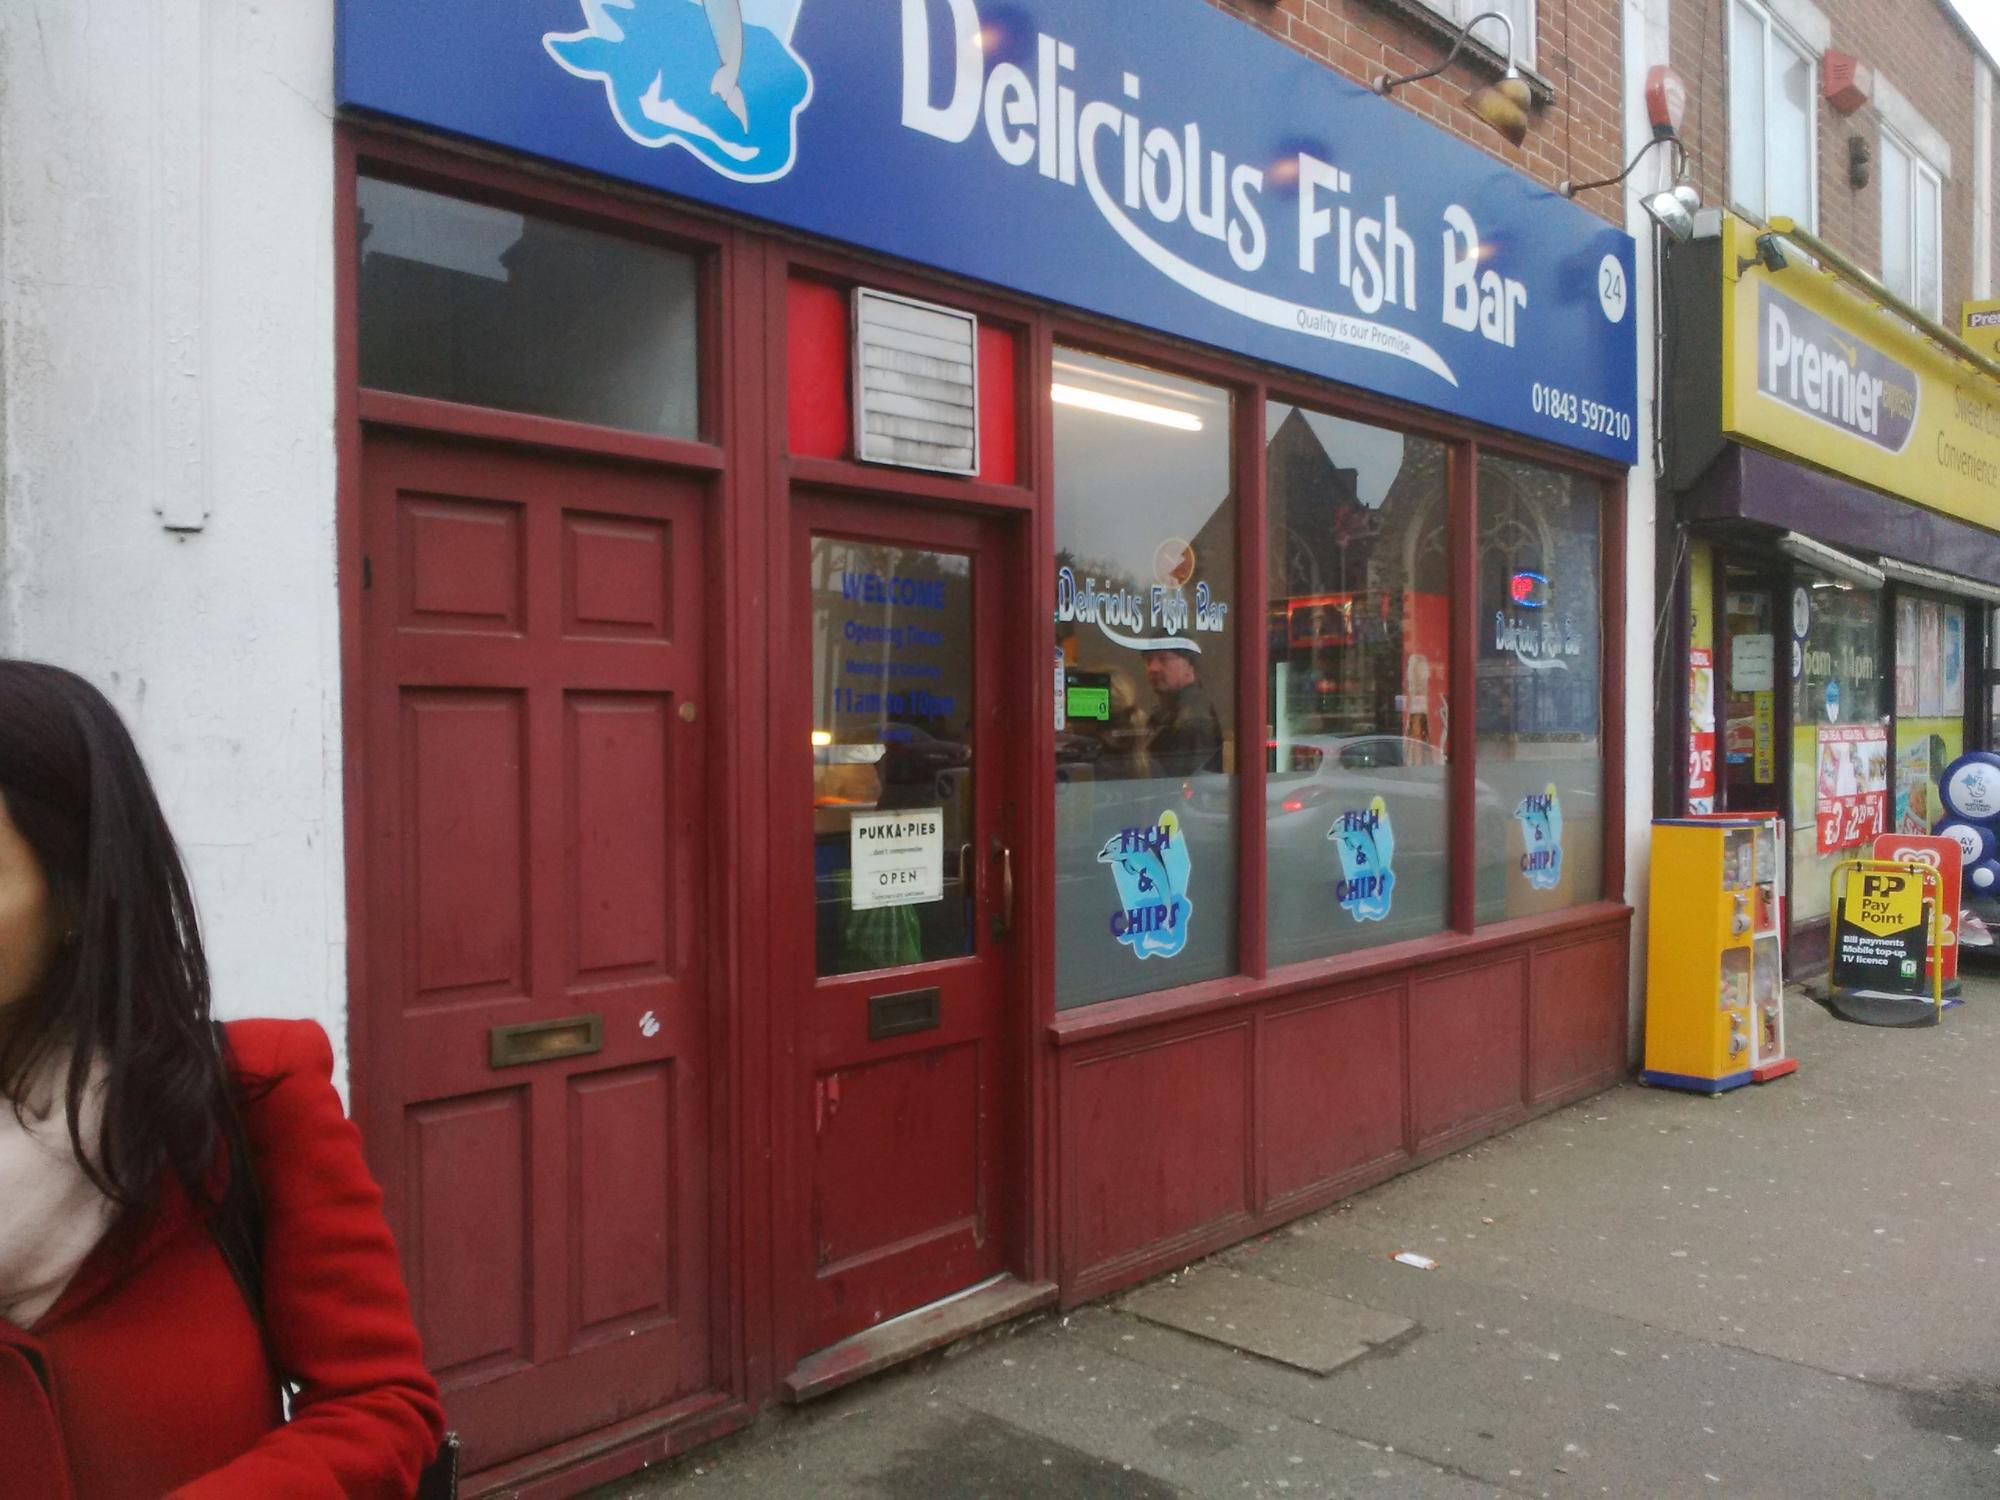 The Delicious Fish Bar